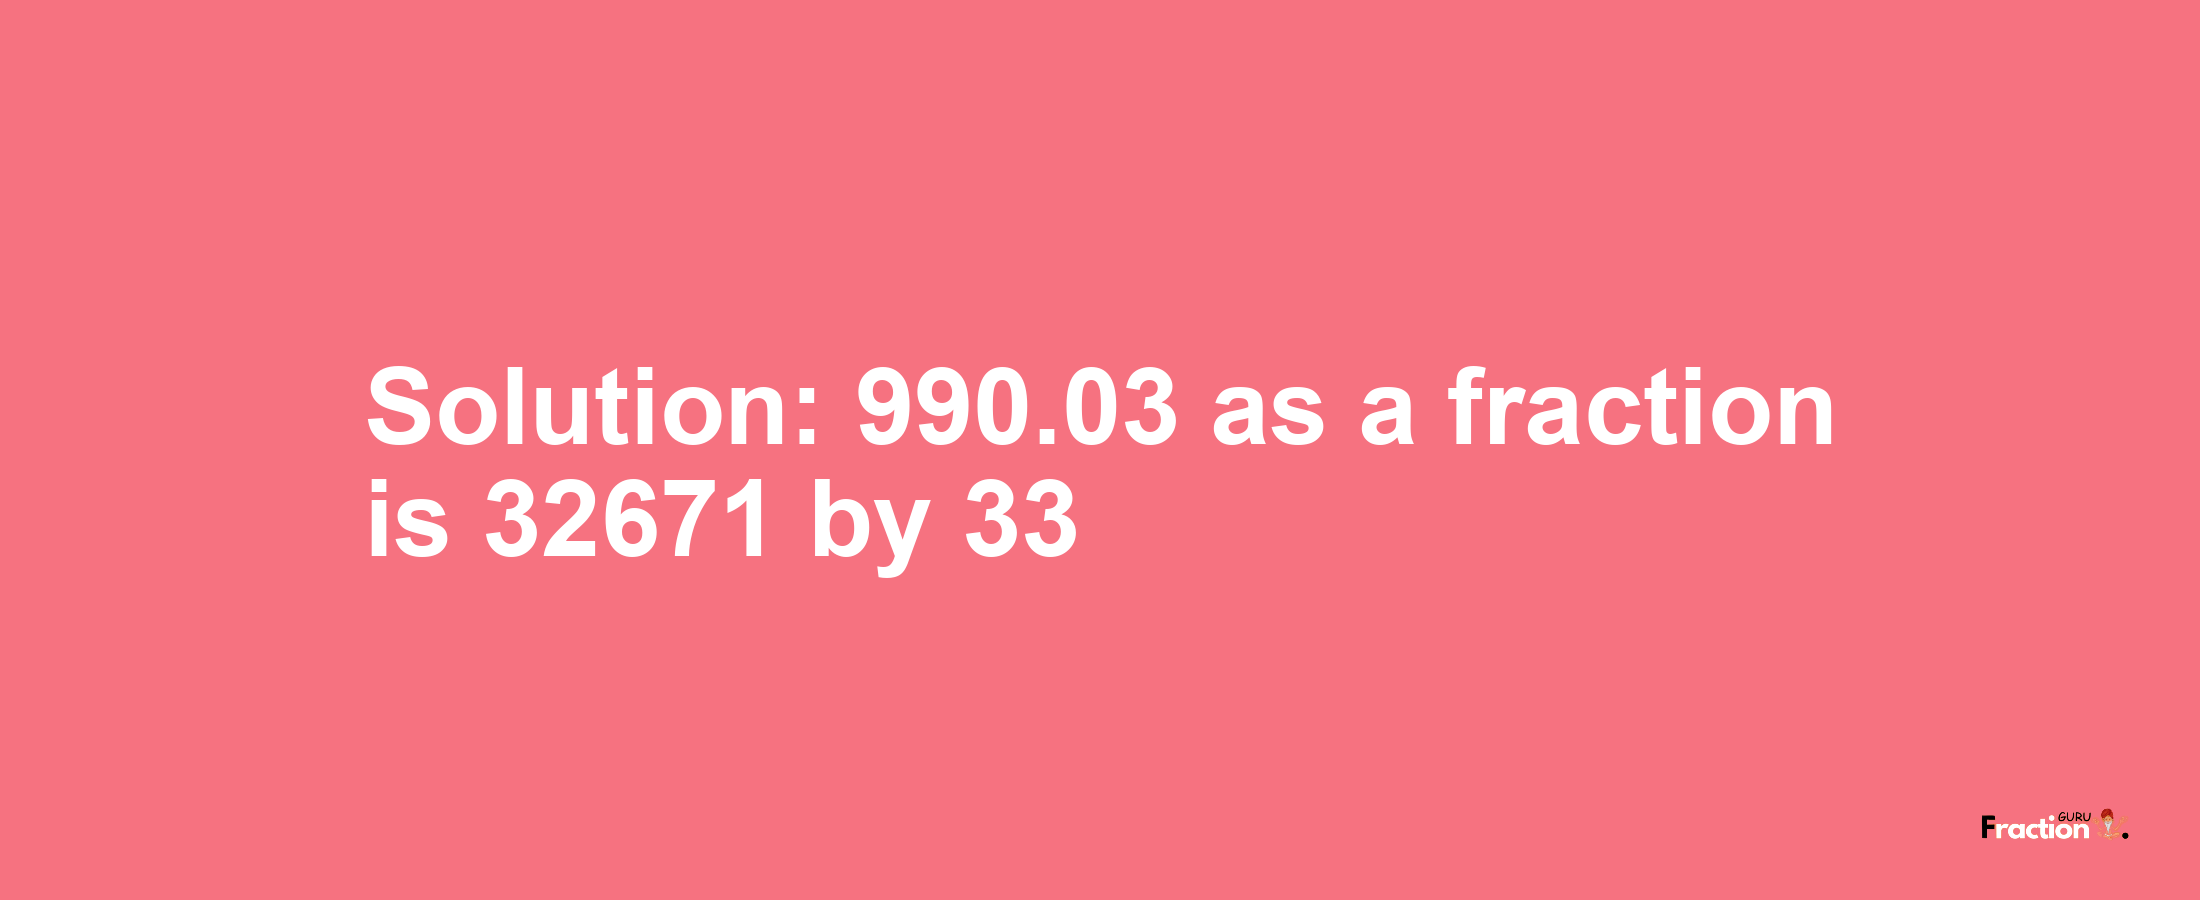 Solution:990.03 as a fraction is 32671/33